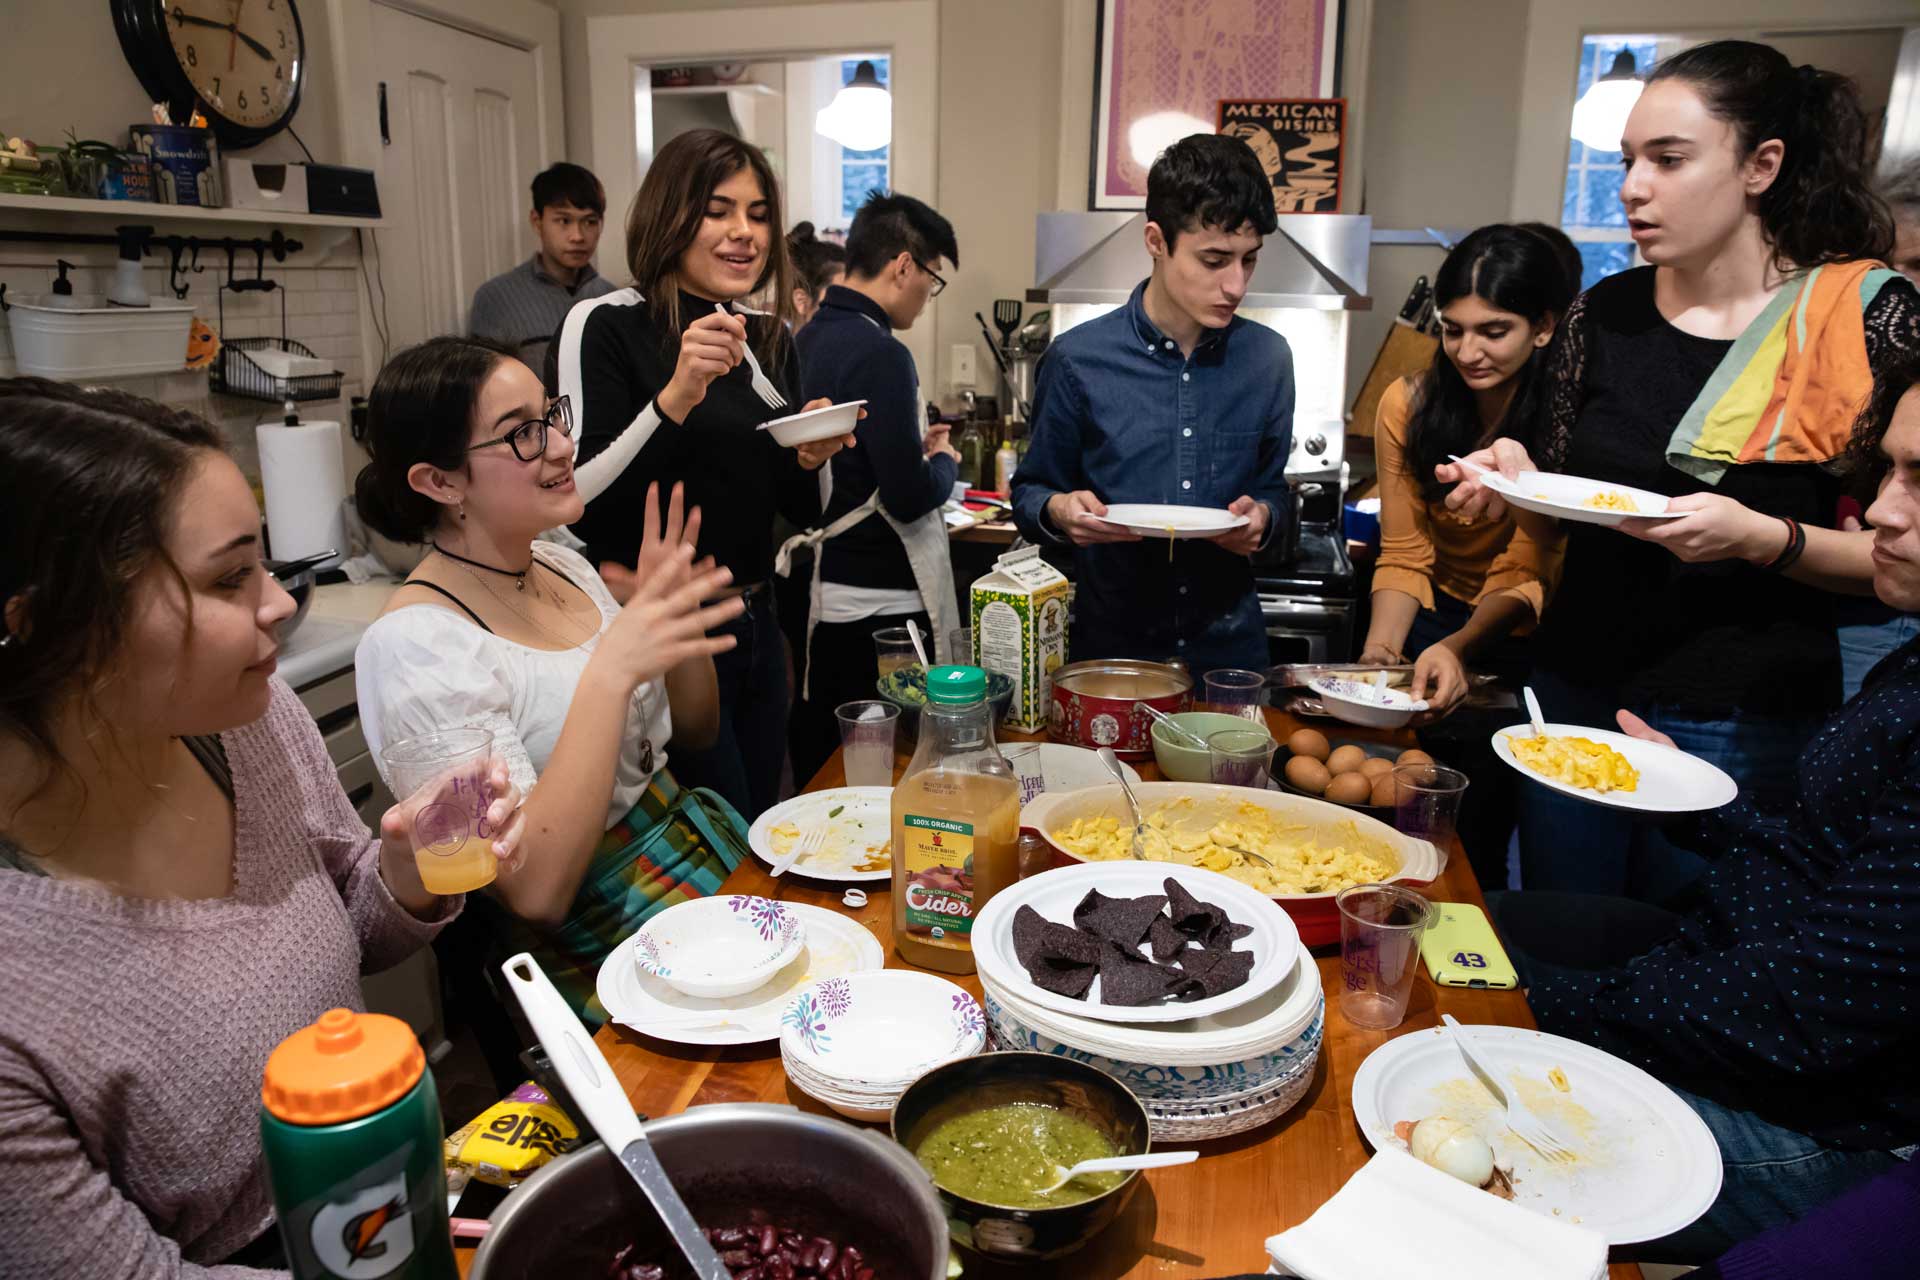 College students eating together in a kitchen